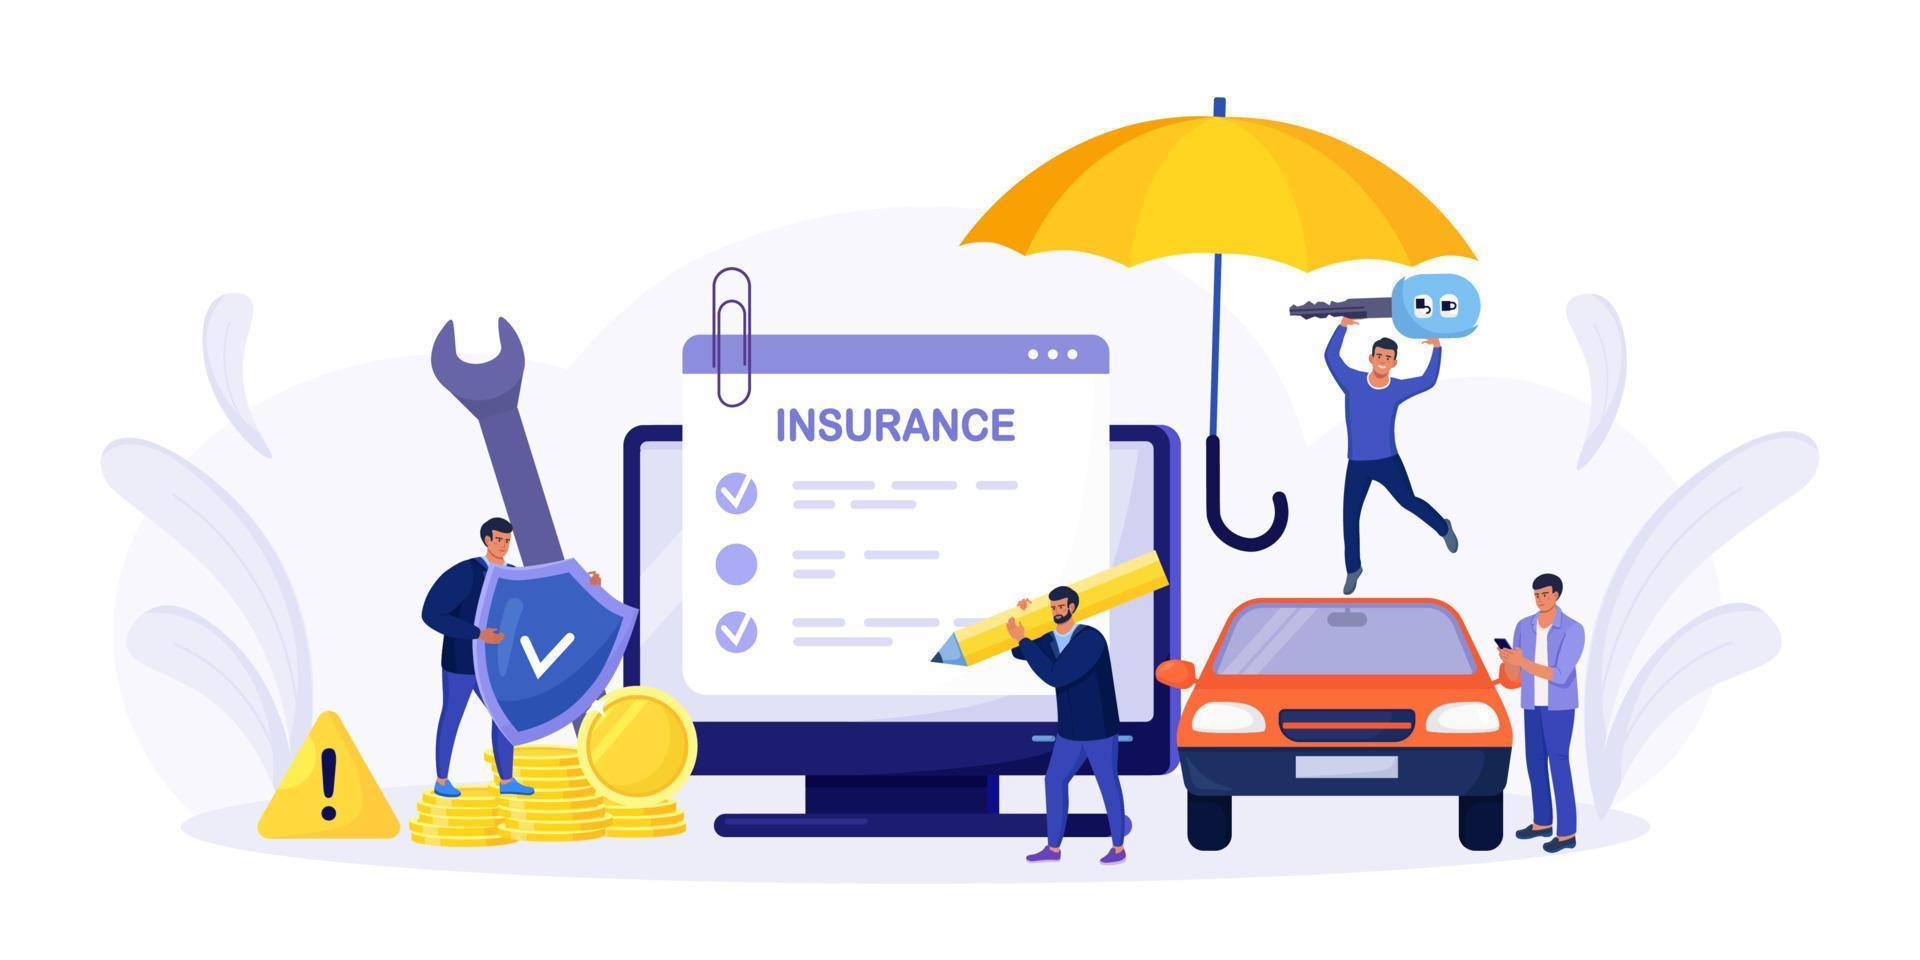 Car insurance policy form on computer screen. Insurance agent or salesman providing security document. People buying auto, leasing. Protection, warranty of vehicle from accident, damage or collision vector